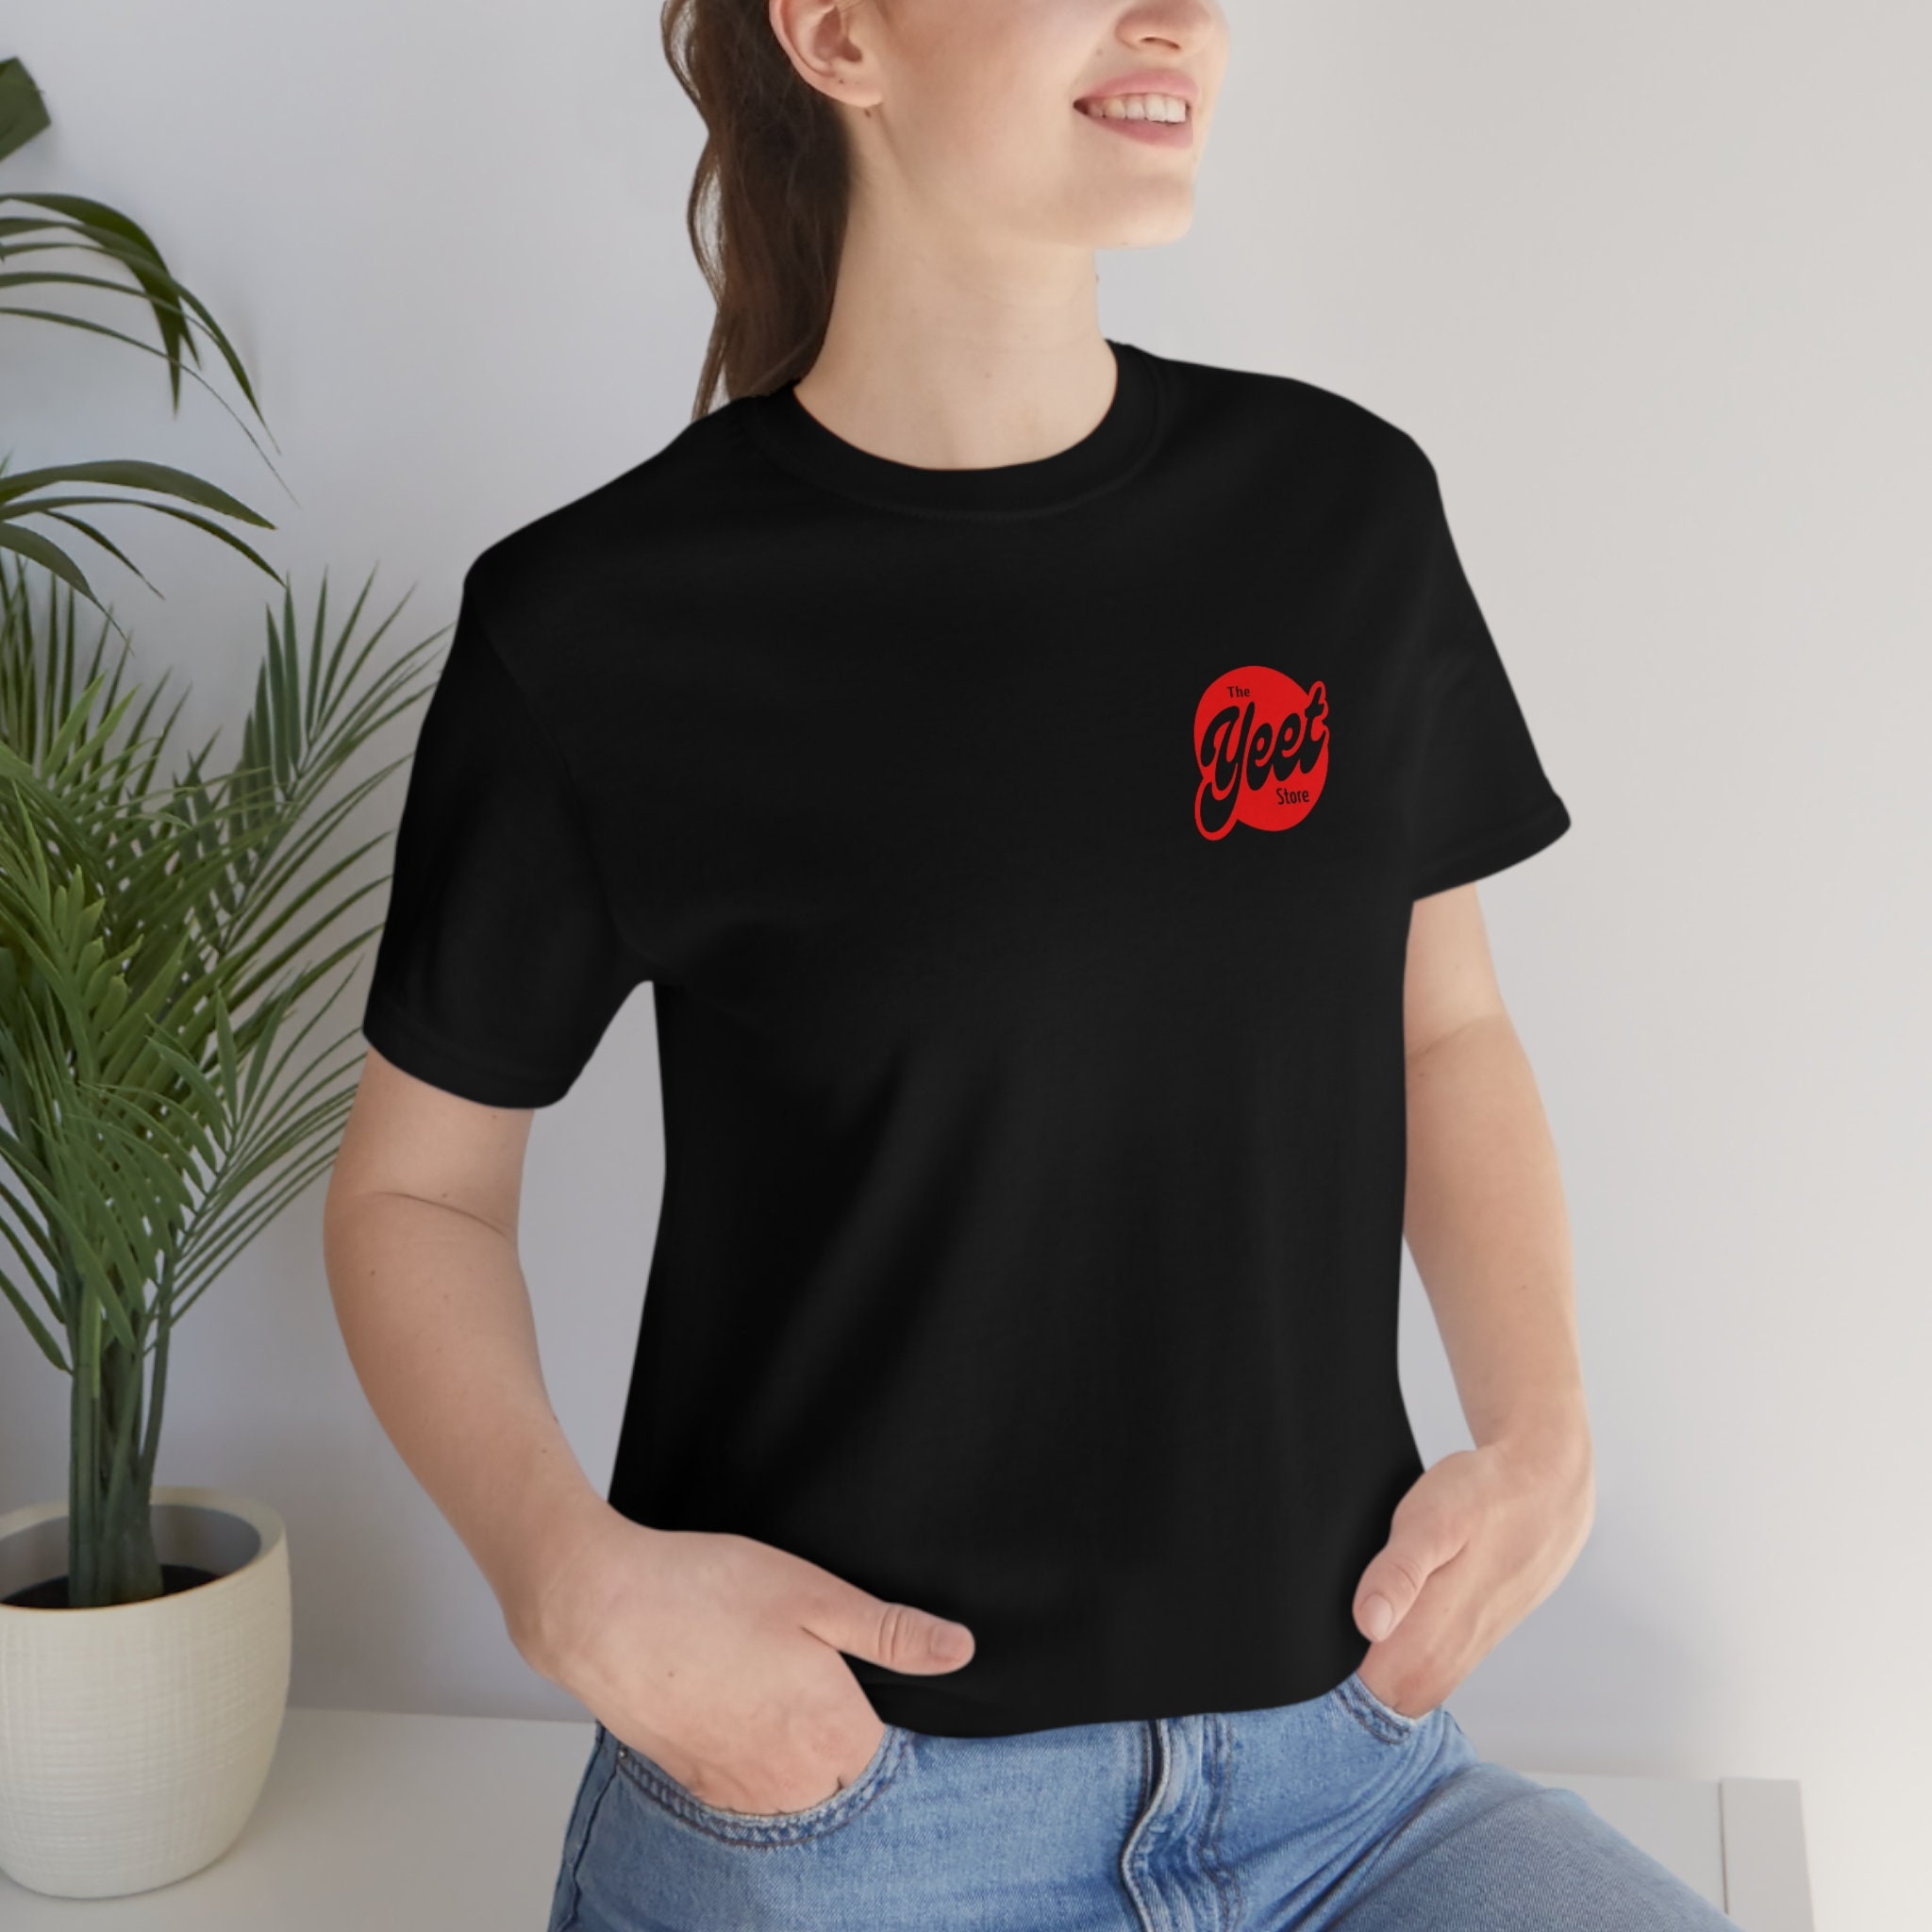 Discover The Yeet Store Shirt, Front and Back Design, Retro Font Shirt